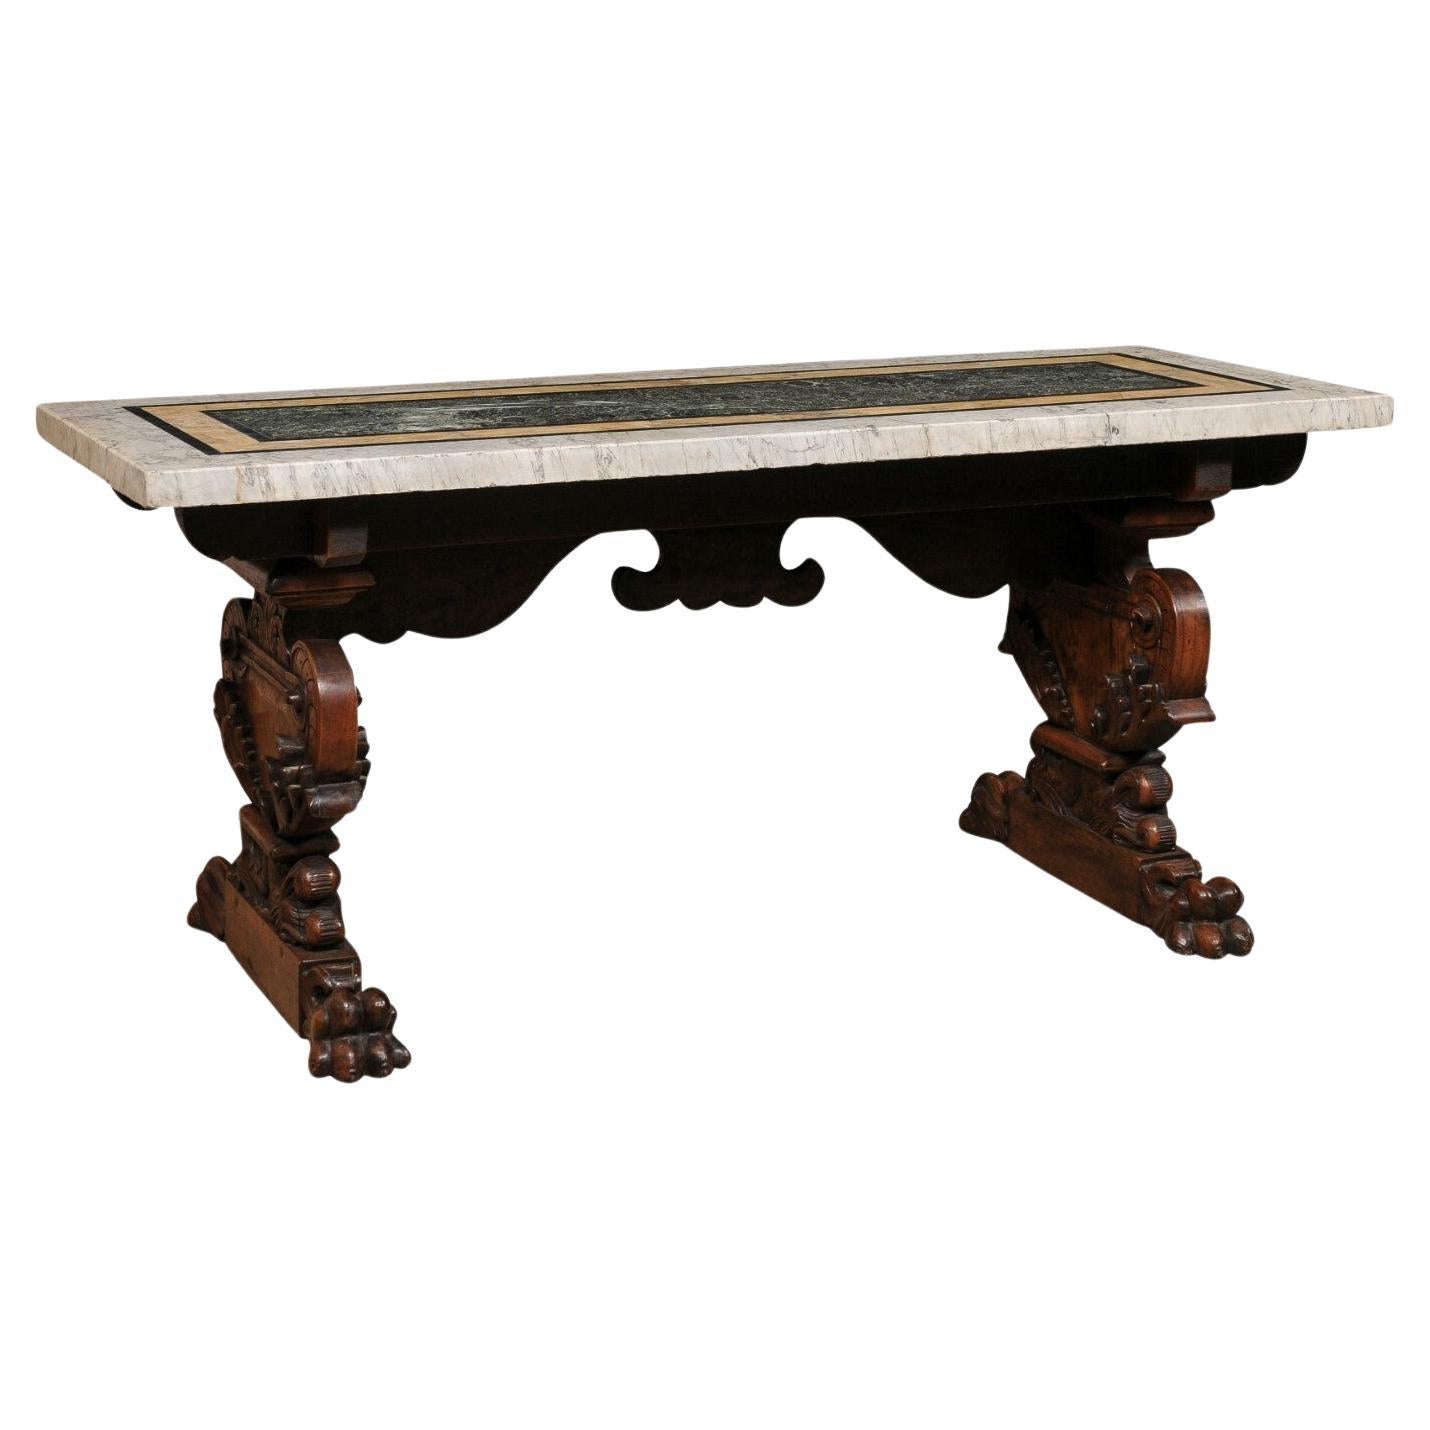 A Gorgeous 18th C Italian Inlaid Marble Top Table w/Robustly Carved Trestle Legs For Sale